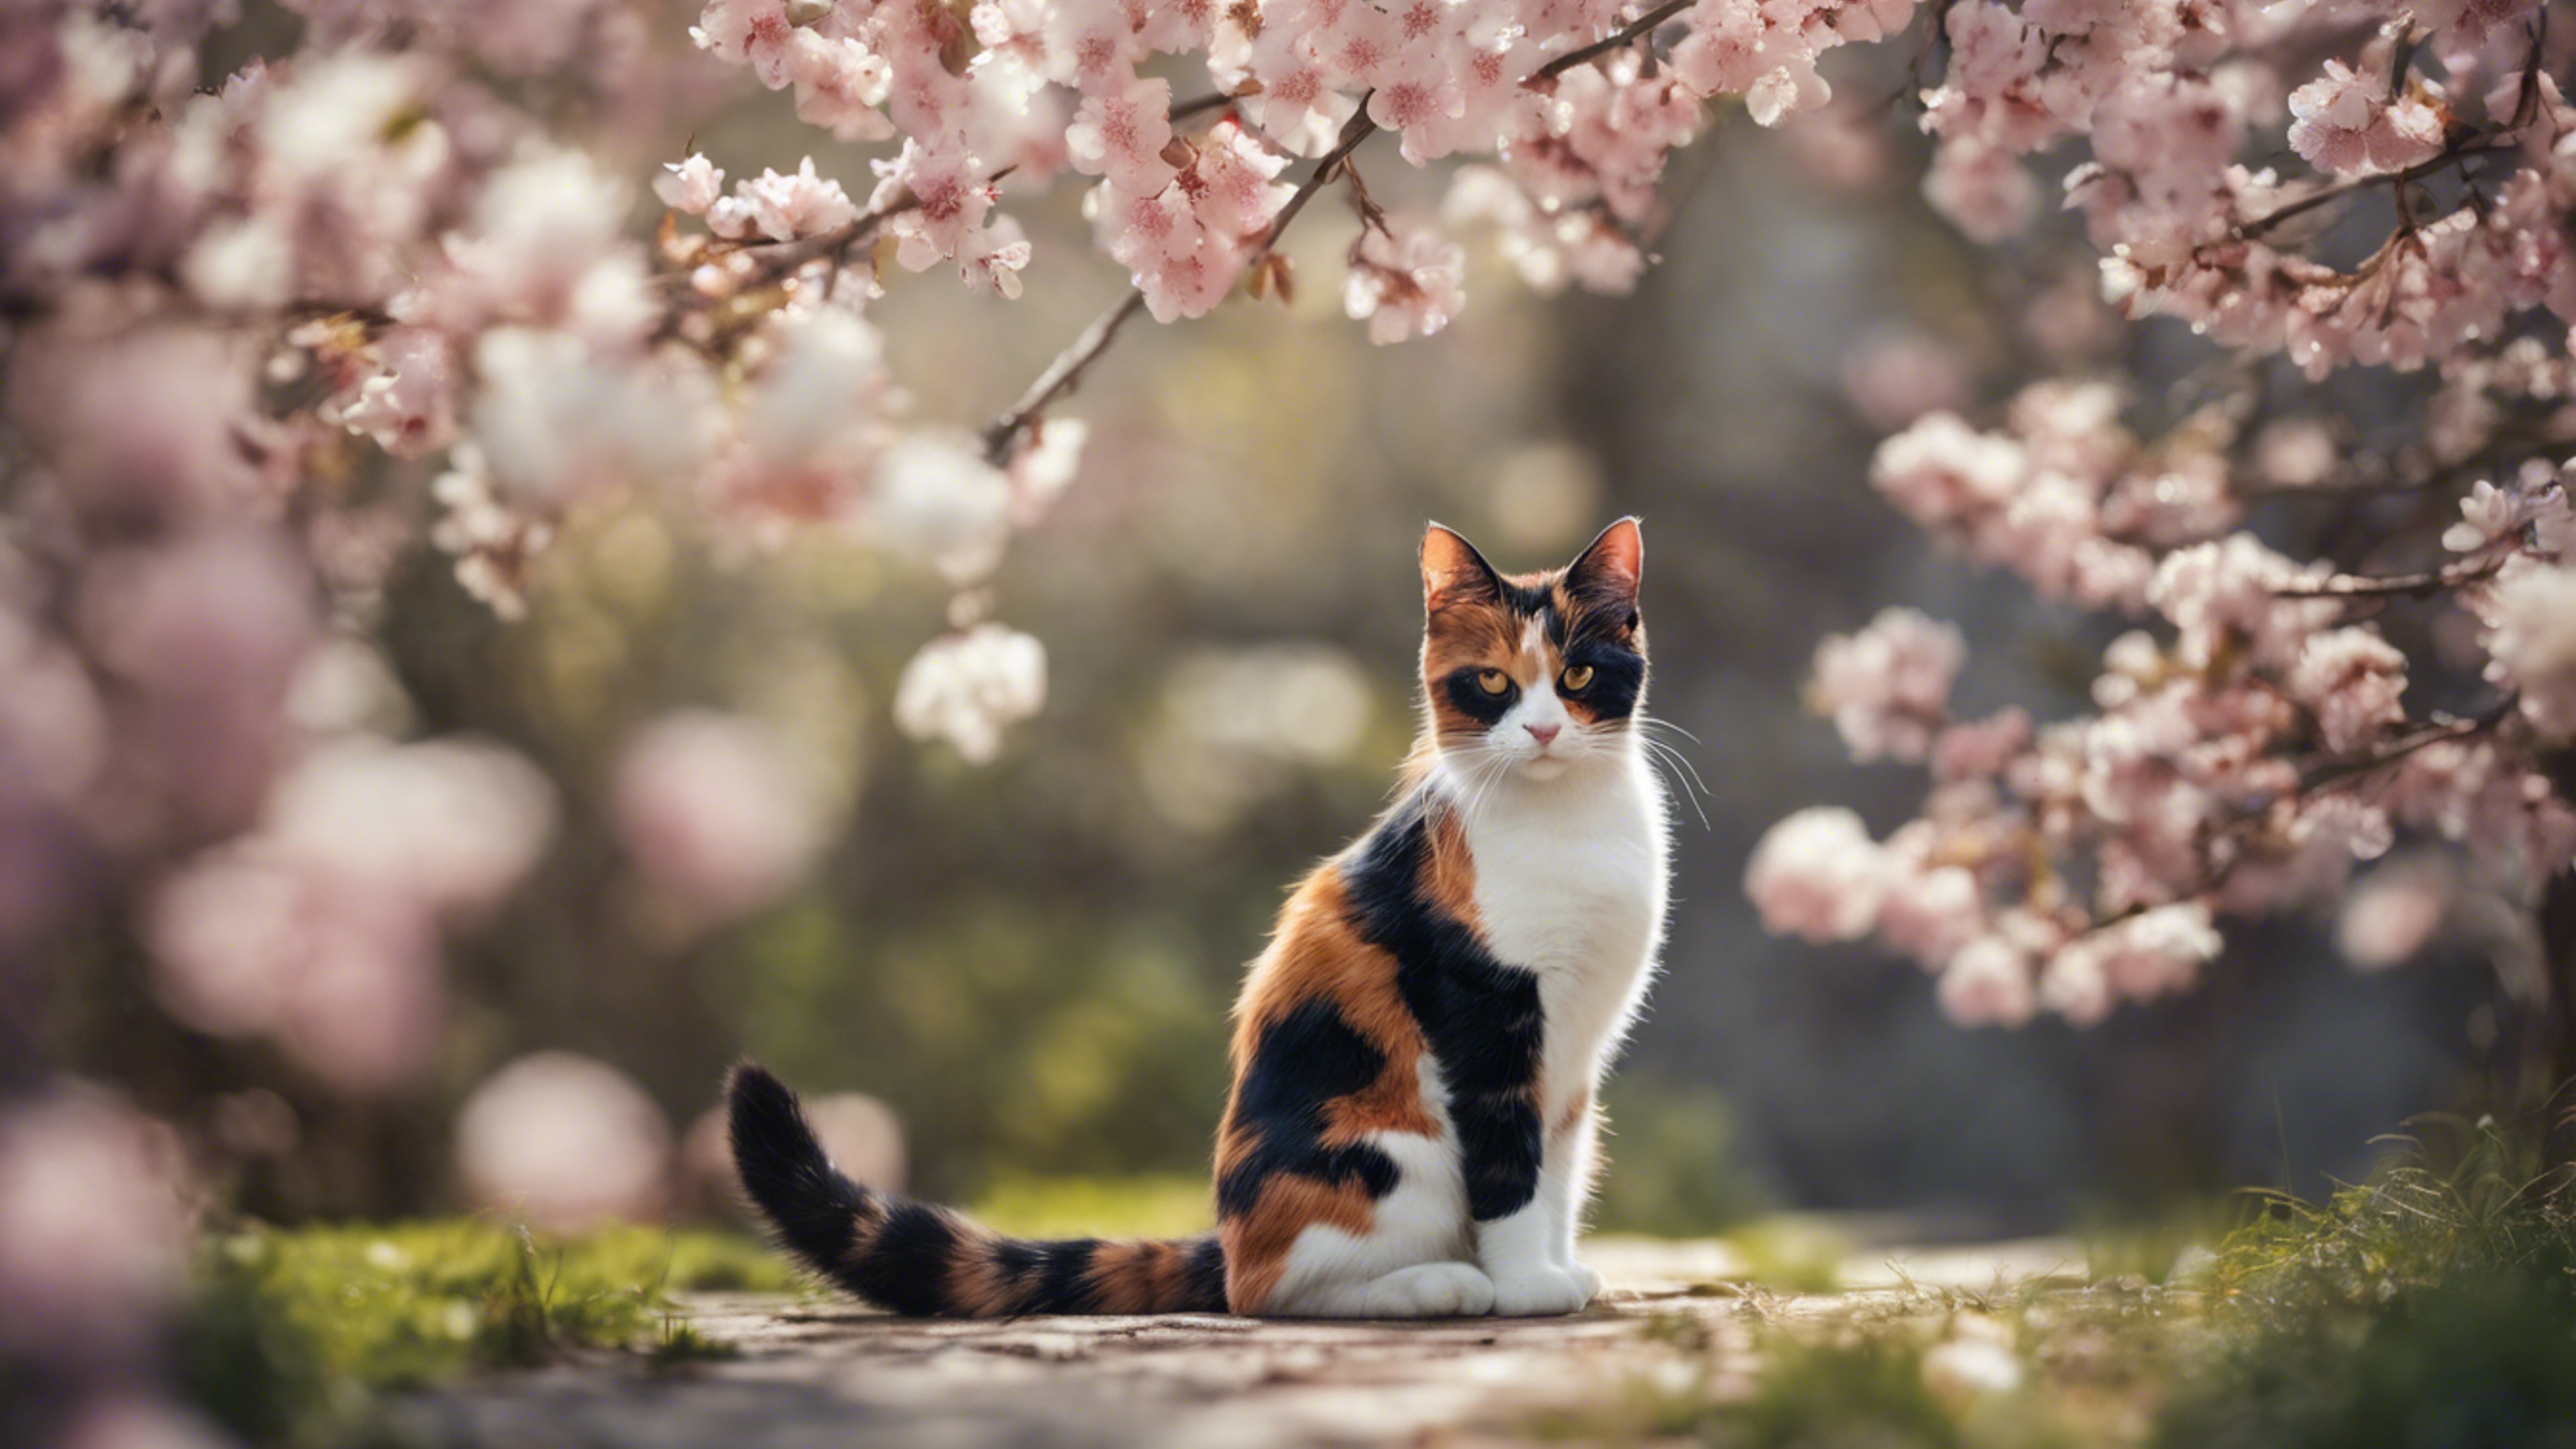 A scene of a secret conversation between spring blossoms and a curious calico cat. Tapeta[25a93ed29c5f43b5b851]